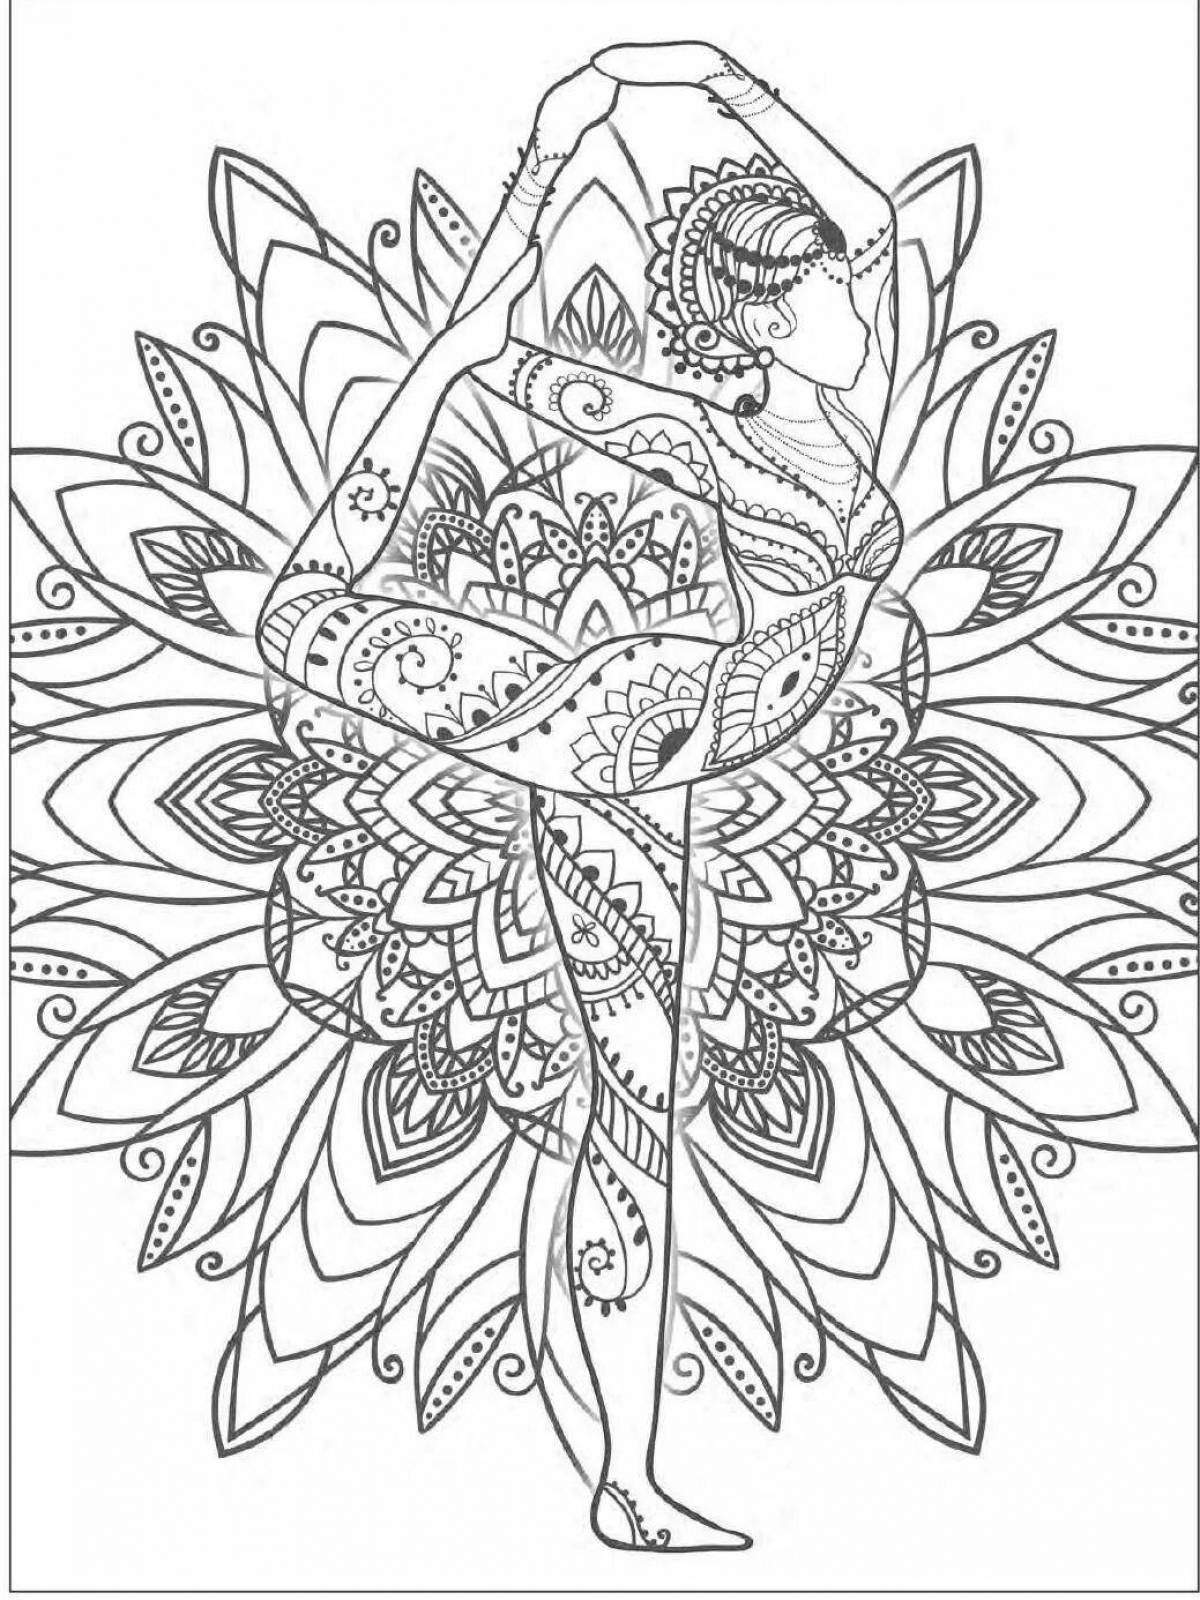 Adorable meditation coloring book for adults